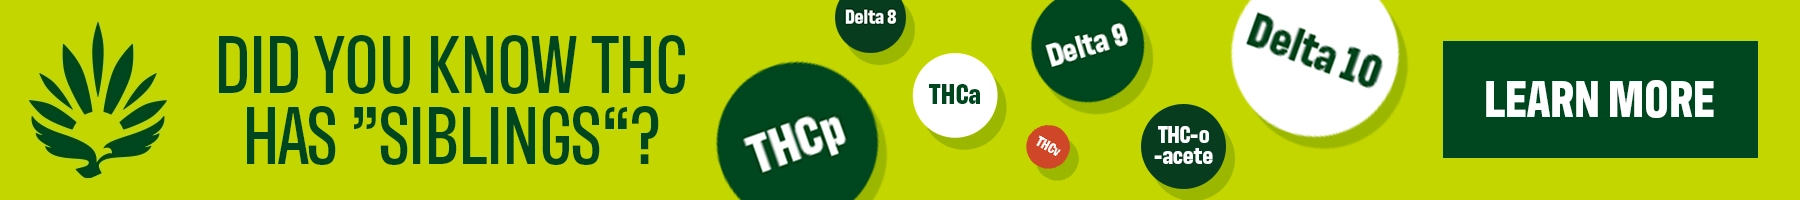 CTA-know-more-types-of-THC